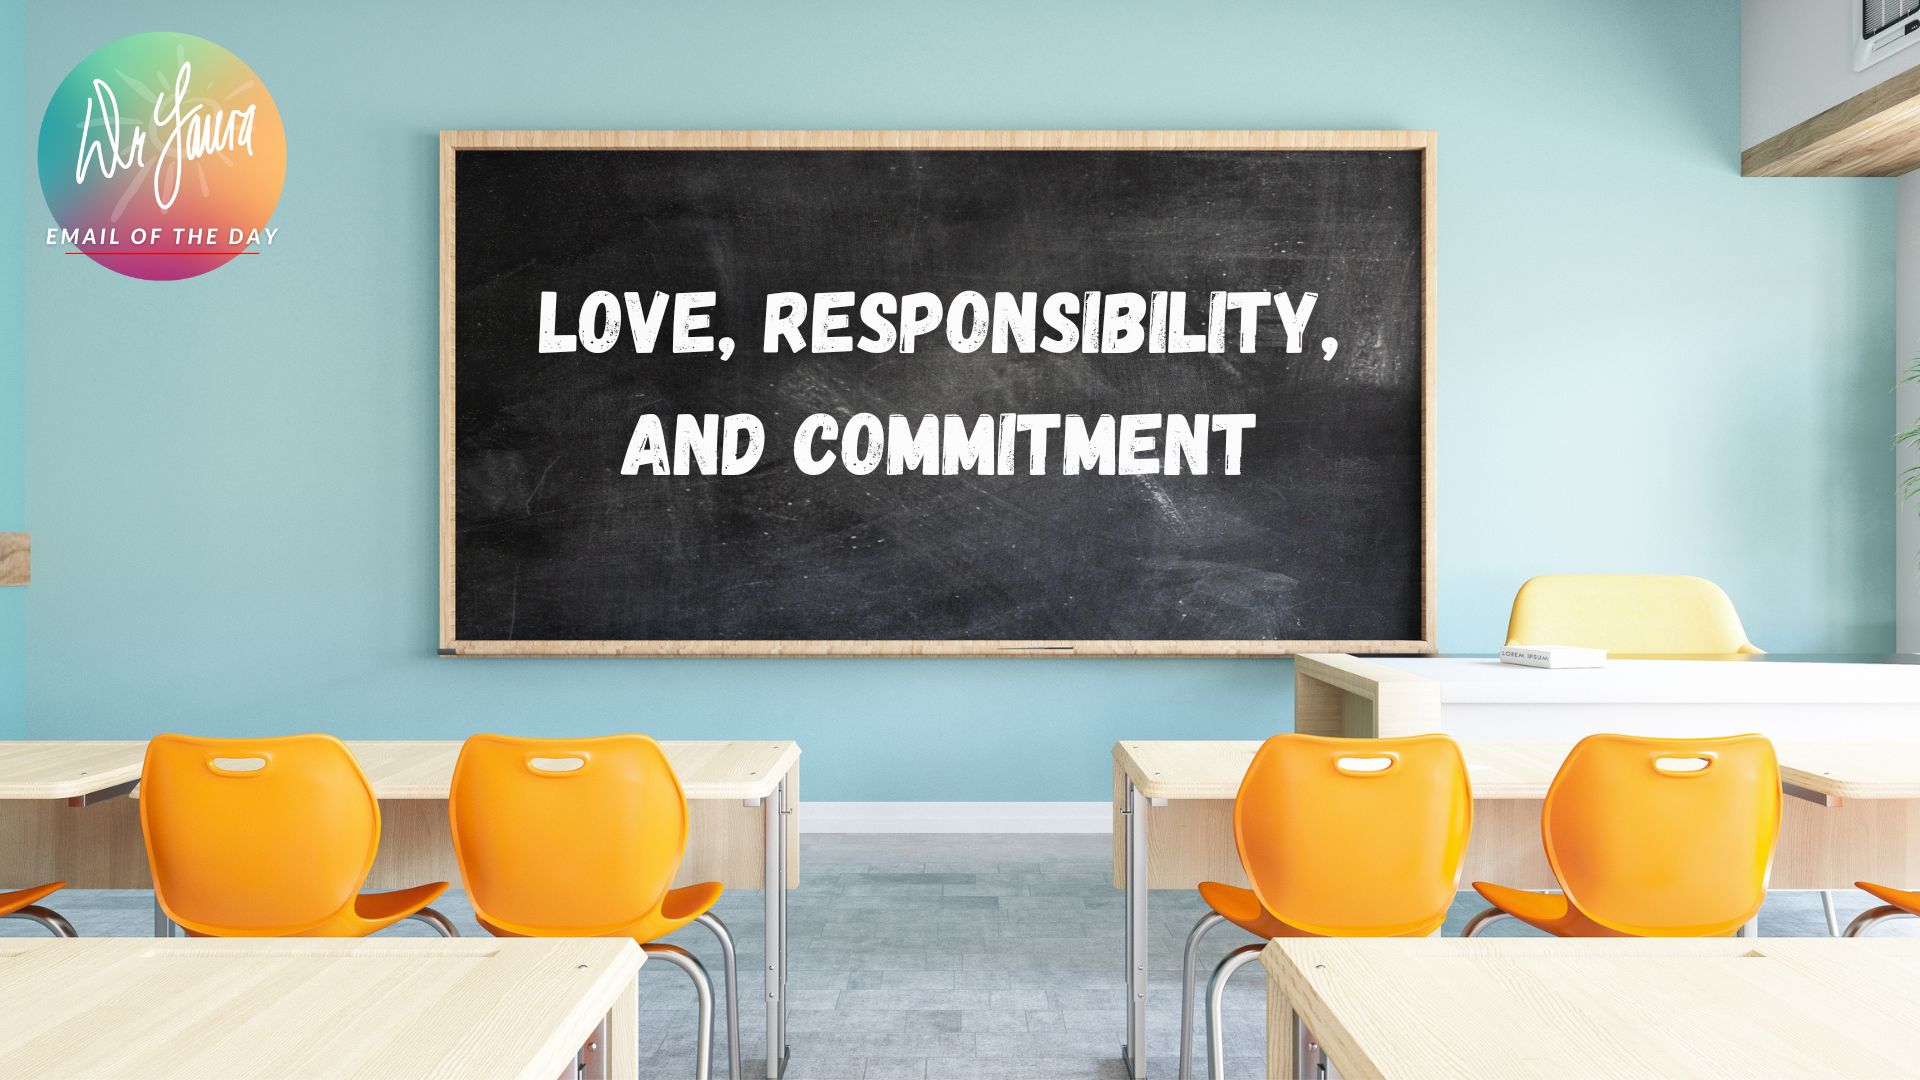 Email of the Day: Lessons in Love, Responsibility, and Commitment